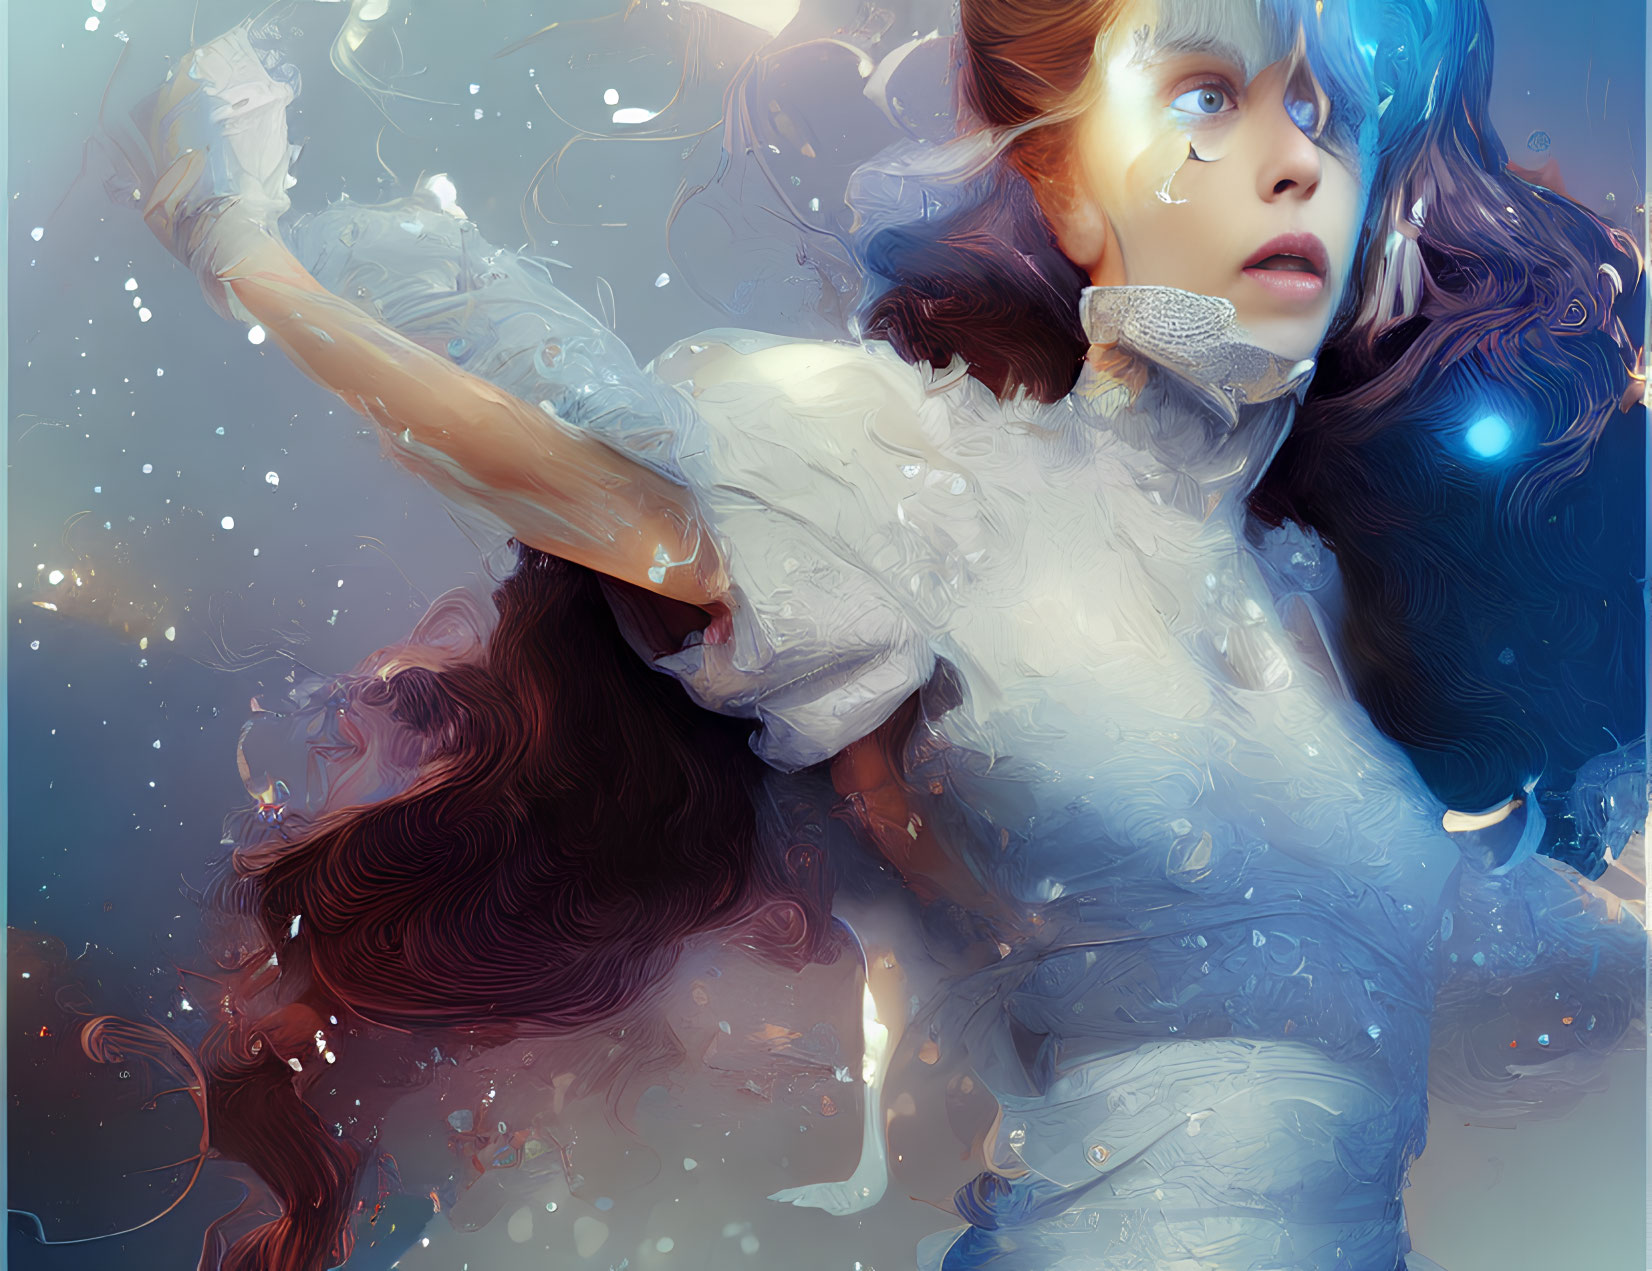 Surreal digital artwork of girl in cosmic blue and white environment